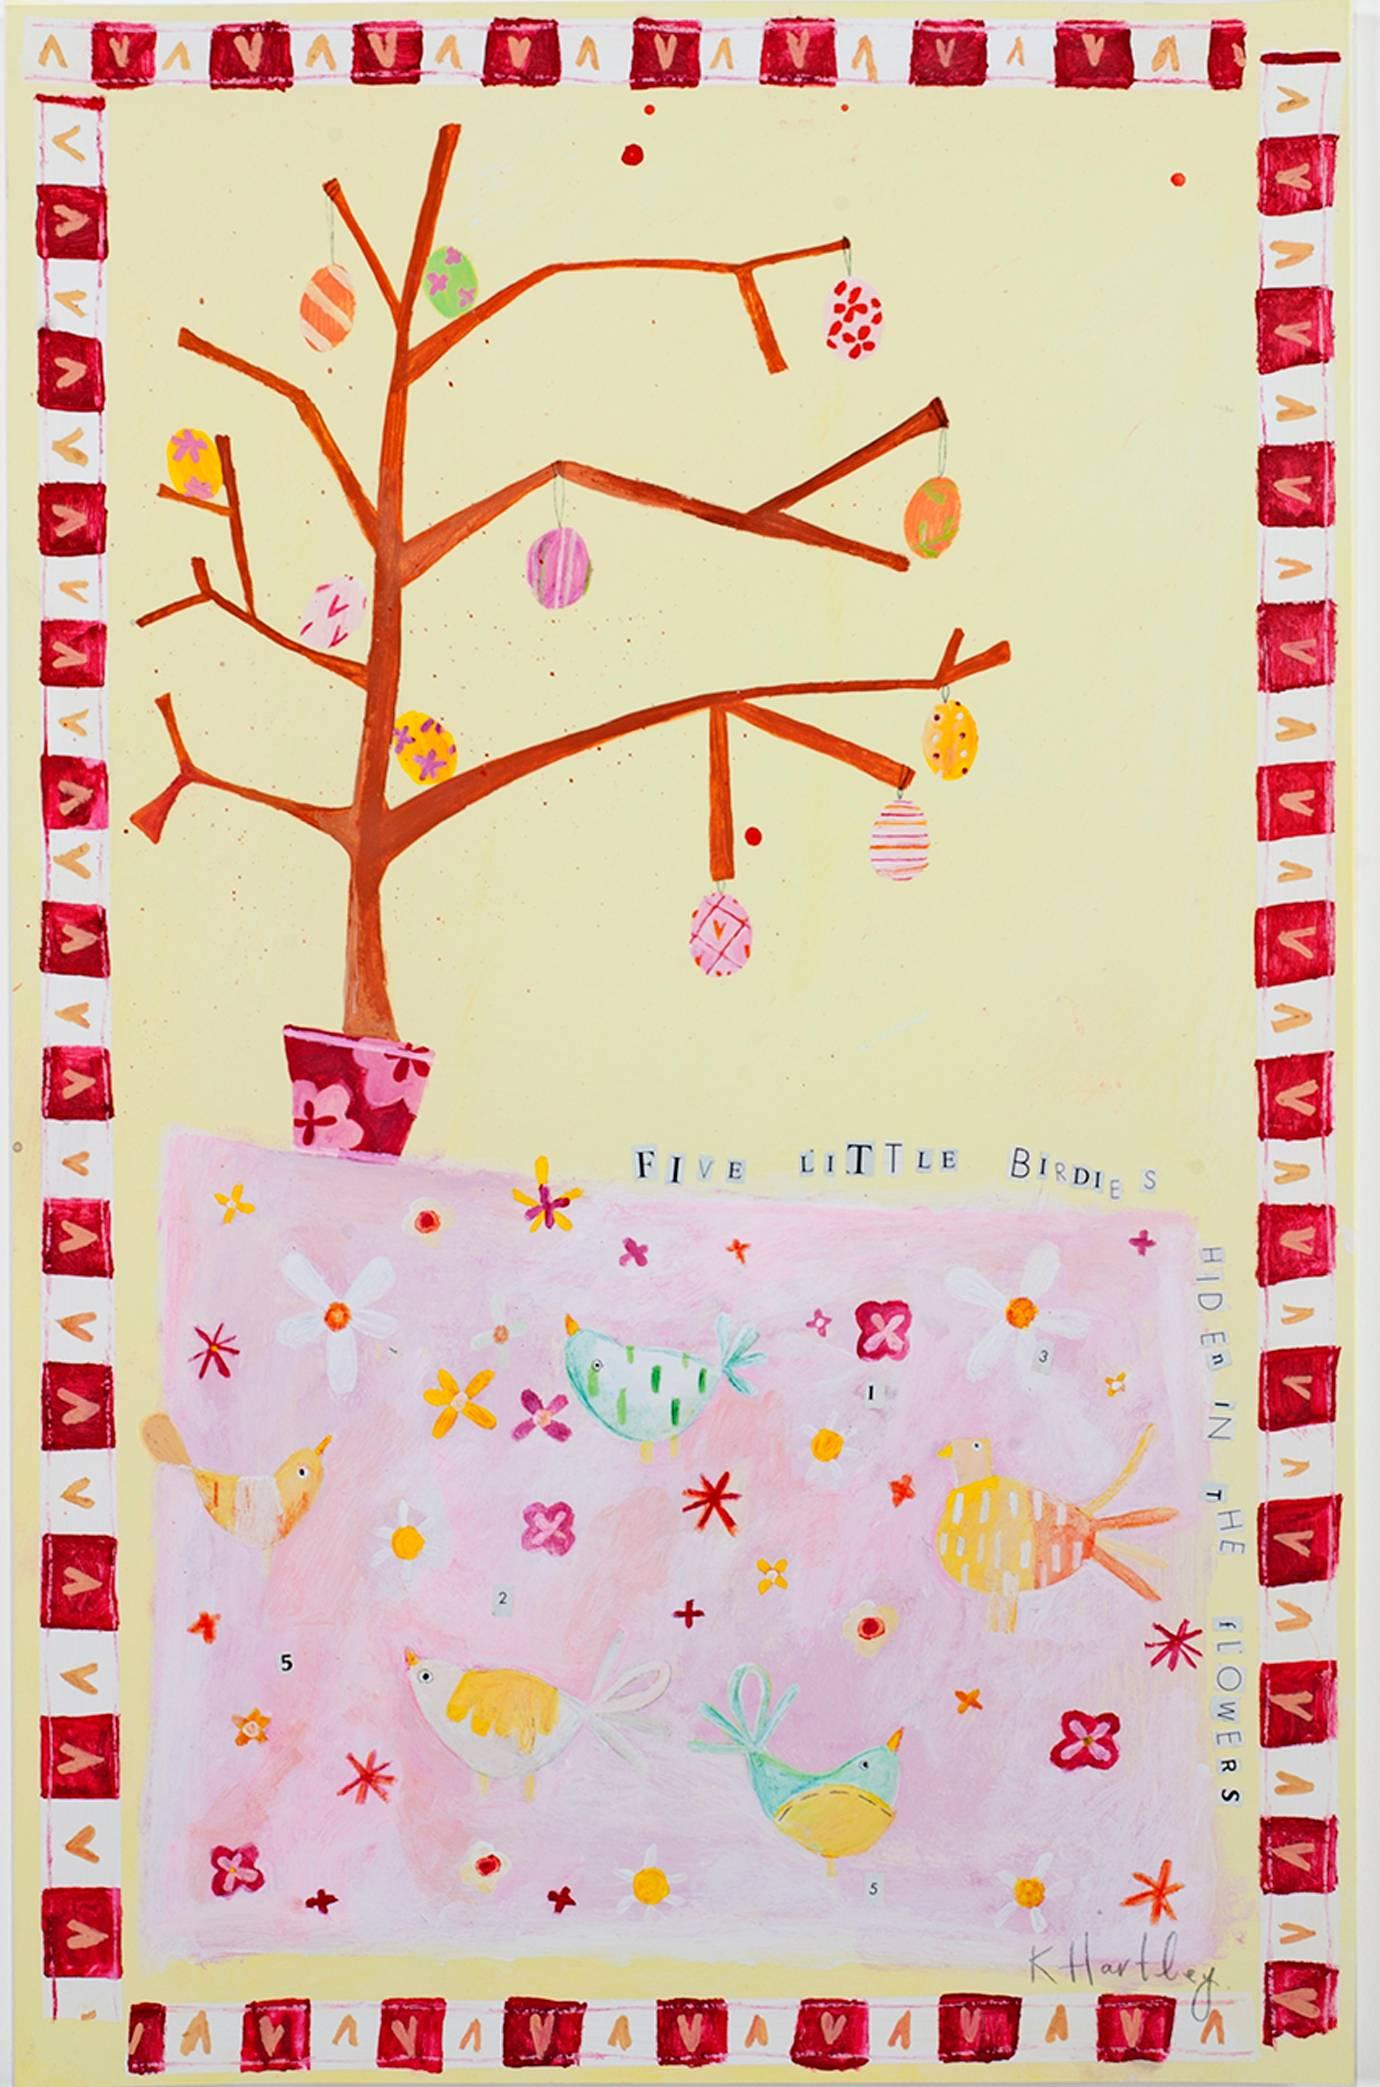 "Five Little Birdies Hidden in the Flowers KMH 37" Mixed Media signed by Hartley - Painting by Katherine Hartley